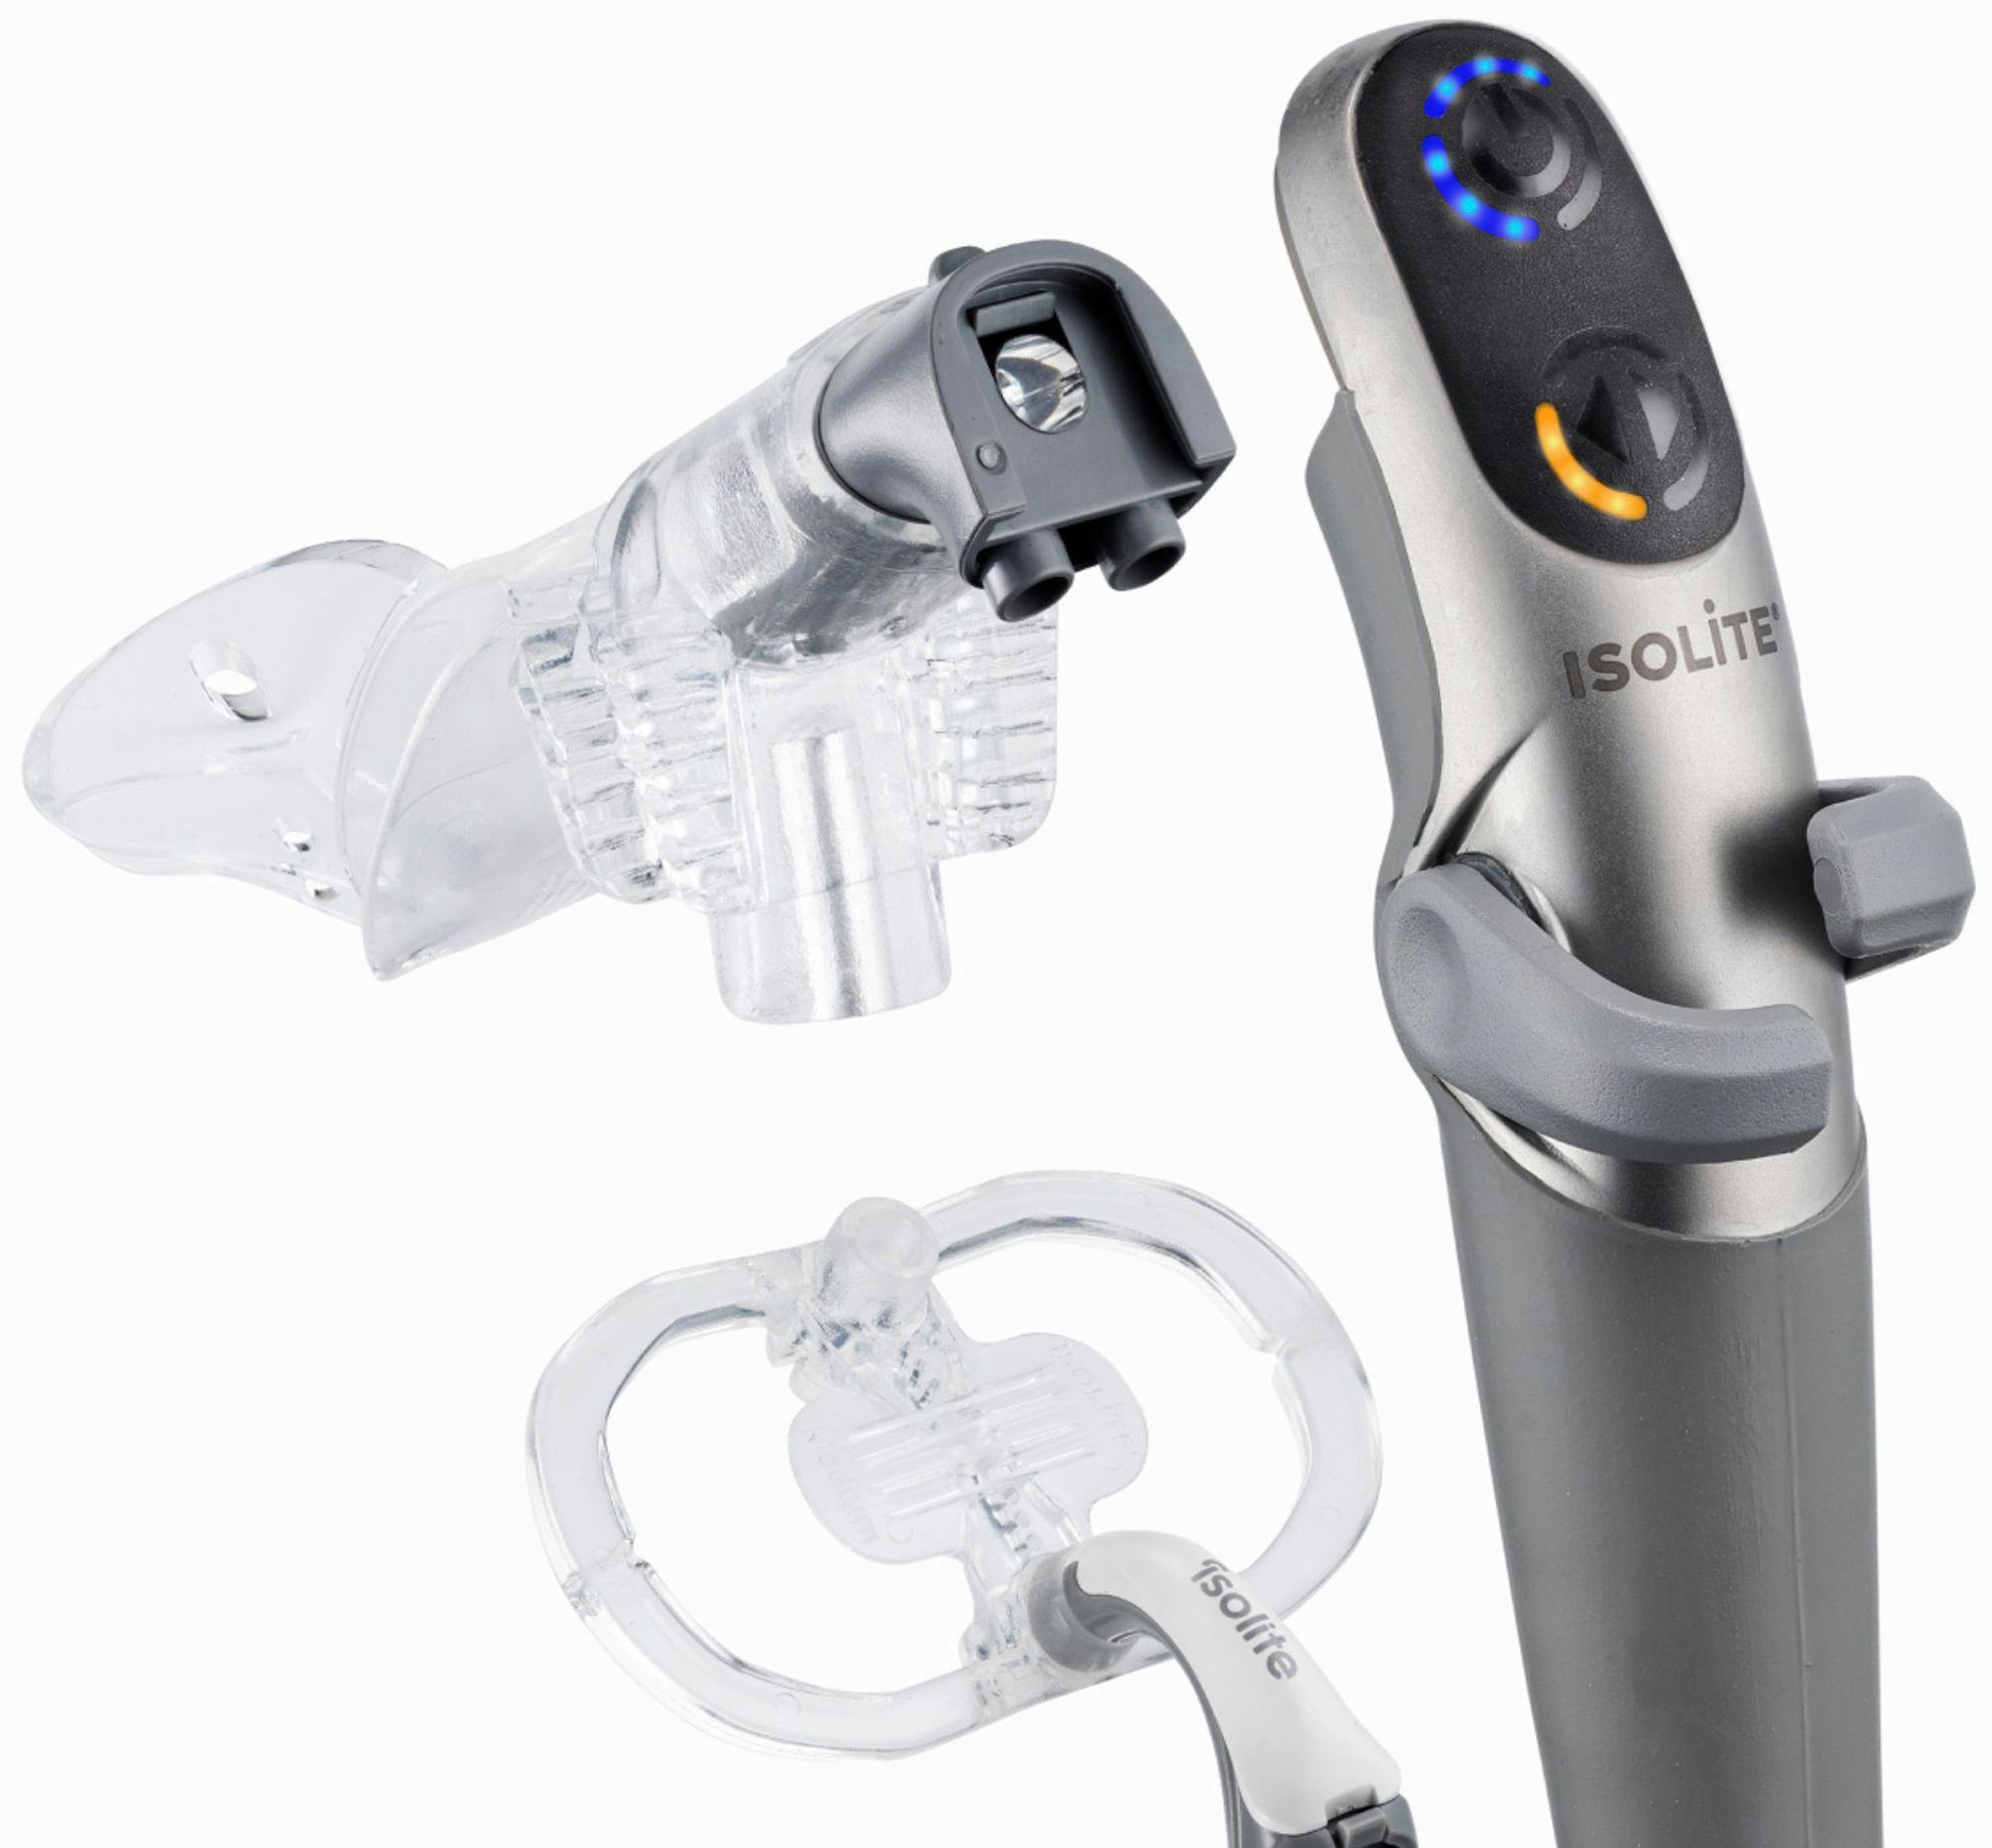 Benco Dental Now Offering Zyris Products Including Isolite